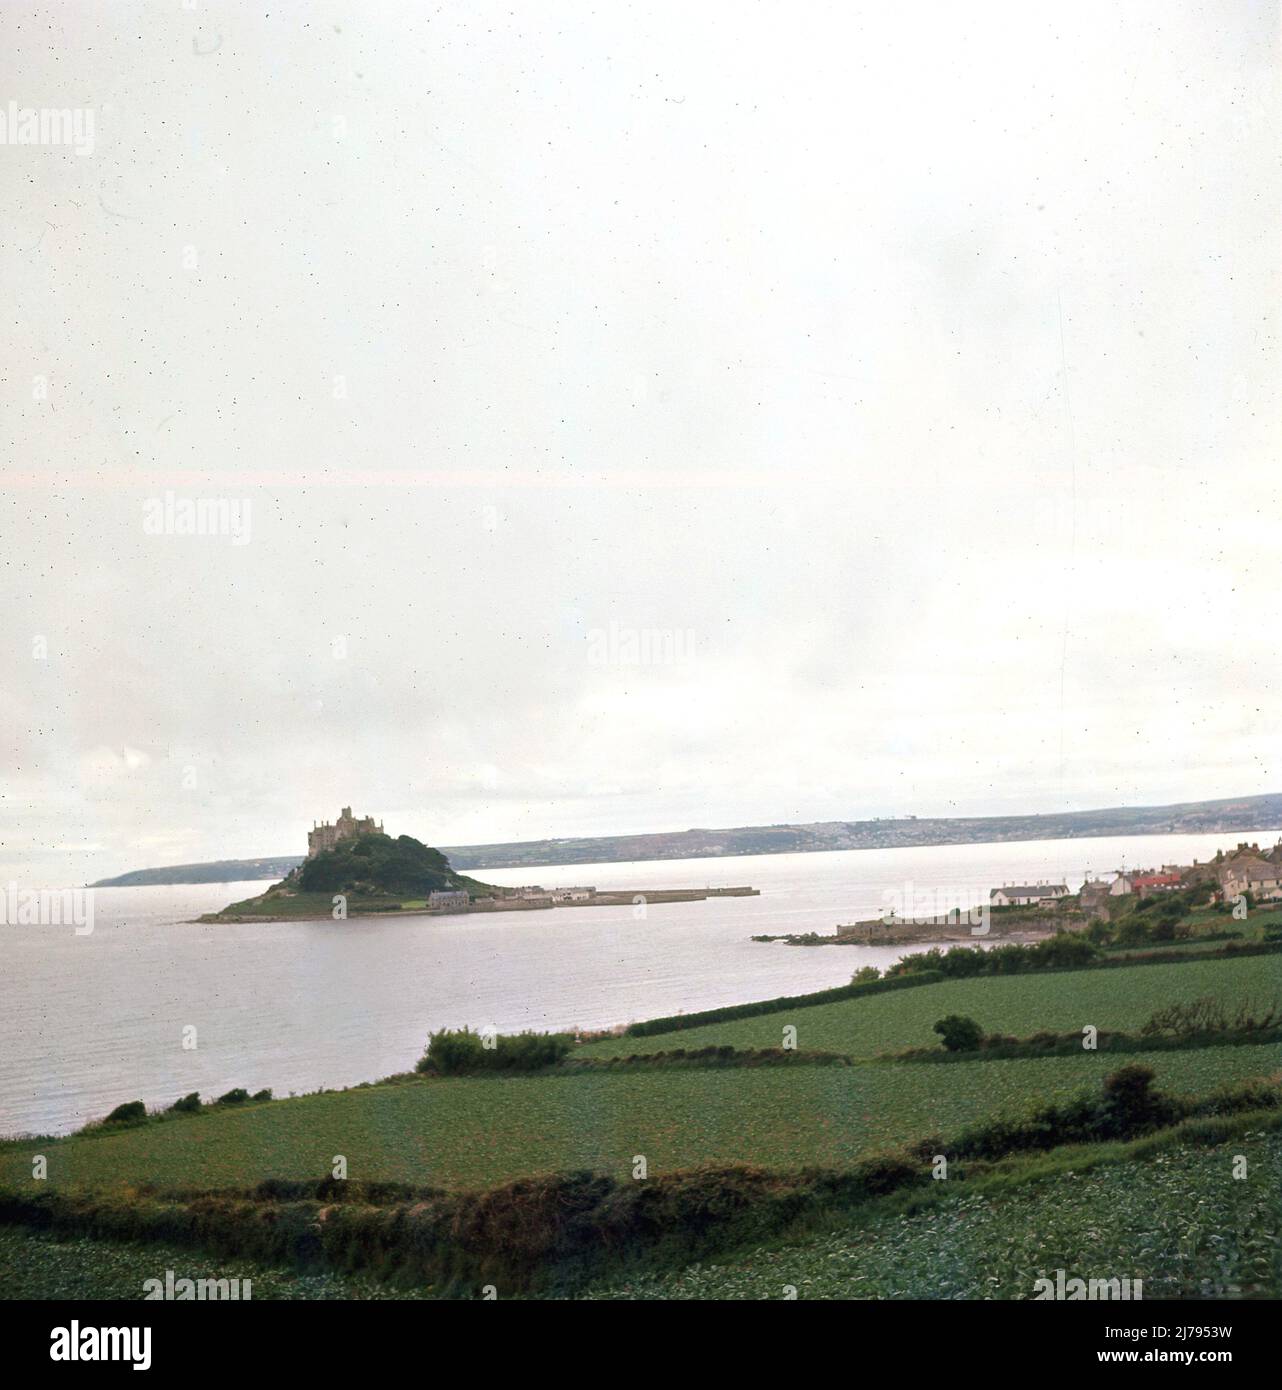 1970, historical, Saint Micheal's Mount, Mounts Bay, a historic castle and tidal island off the coast at Marazion, Cornwall, England, UK. At low tide a causeway of granite setts means the island is connected to the mainland. Stock Photo